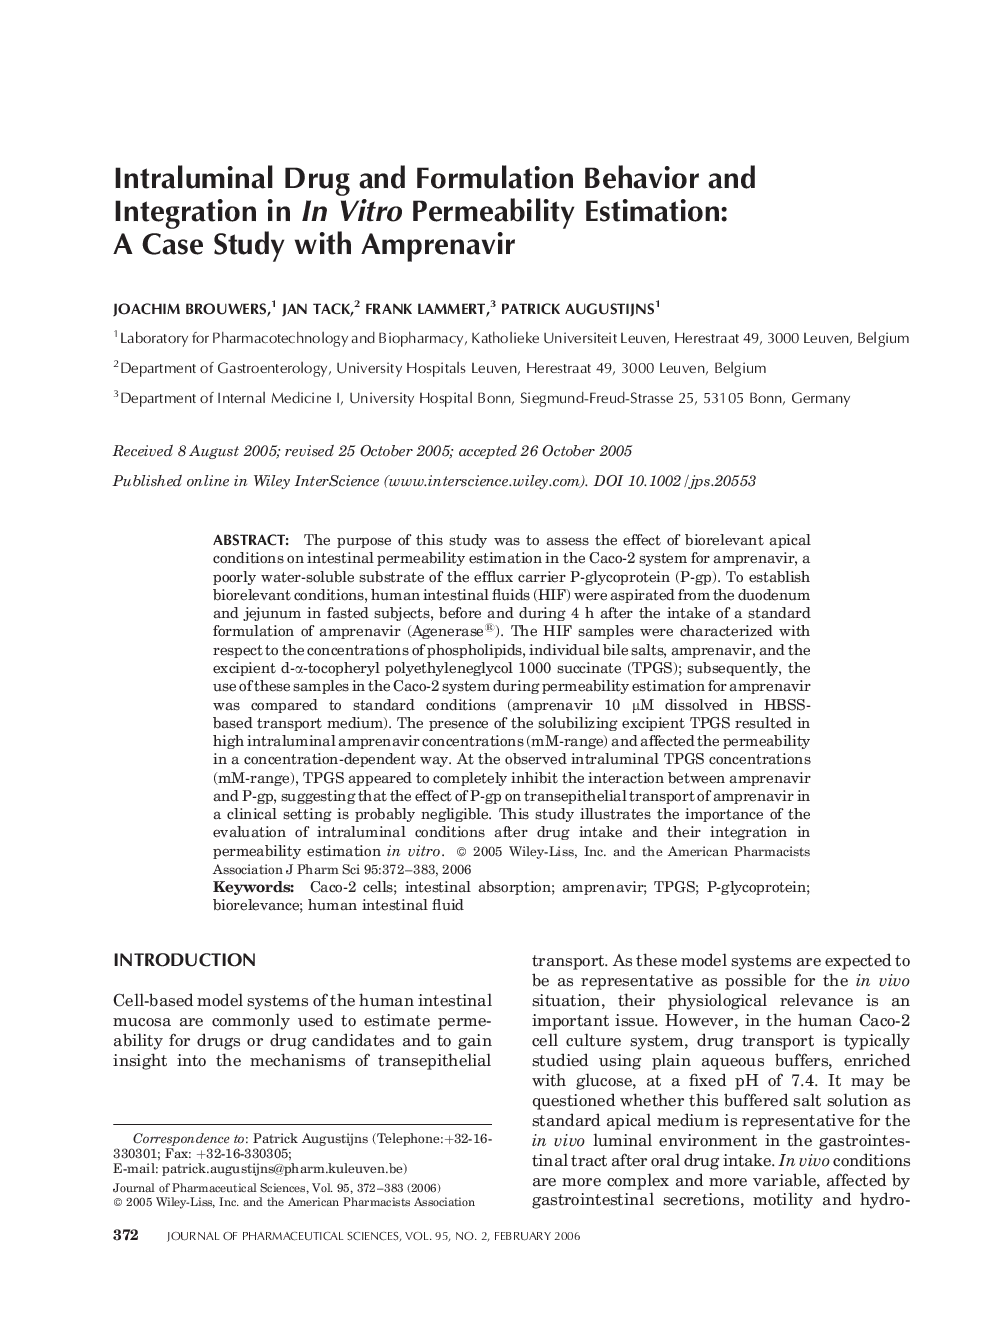 Intraluminal drug and formulation behavior and integration in in vitro permeability estimation: A case study with amprenavir